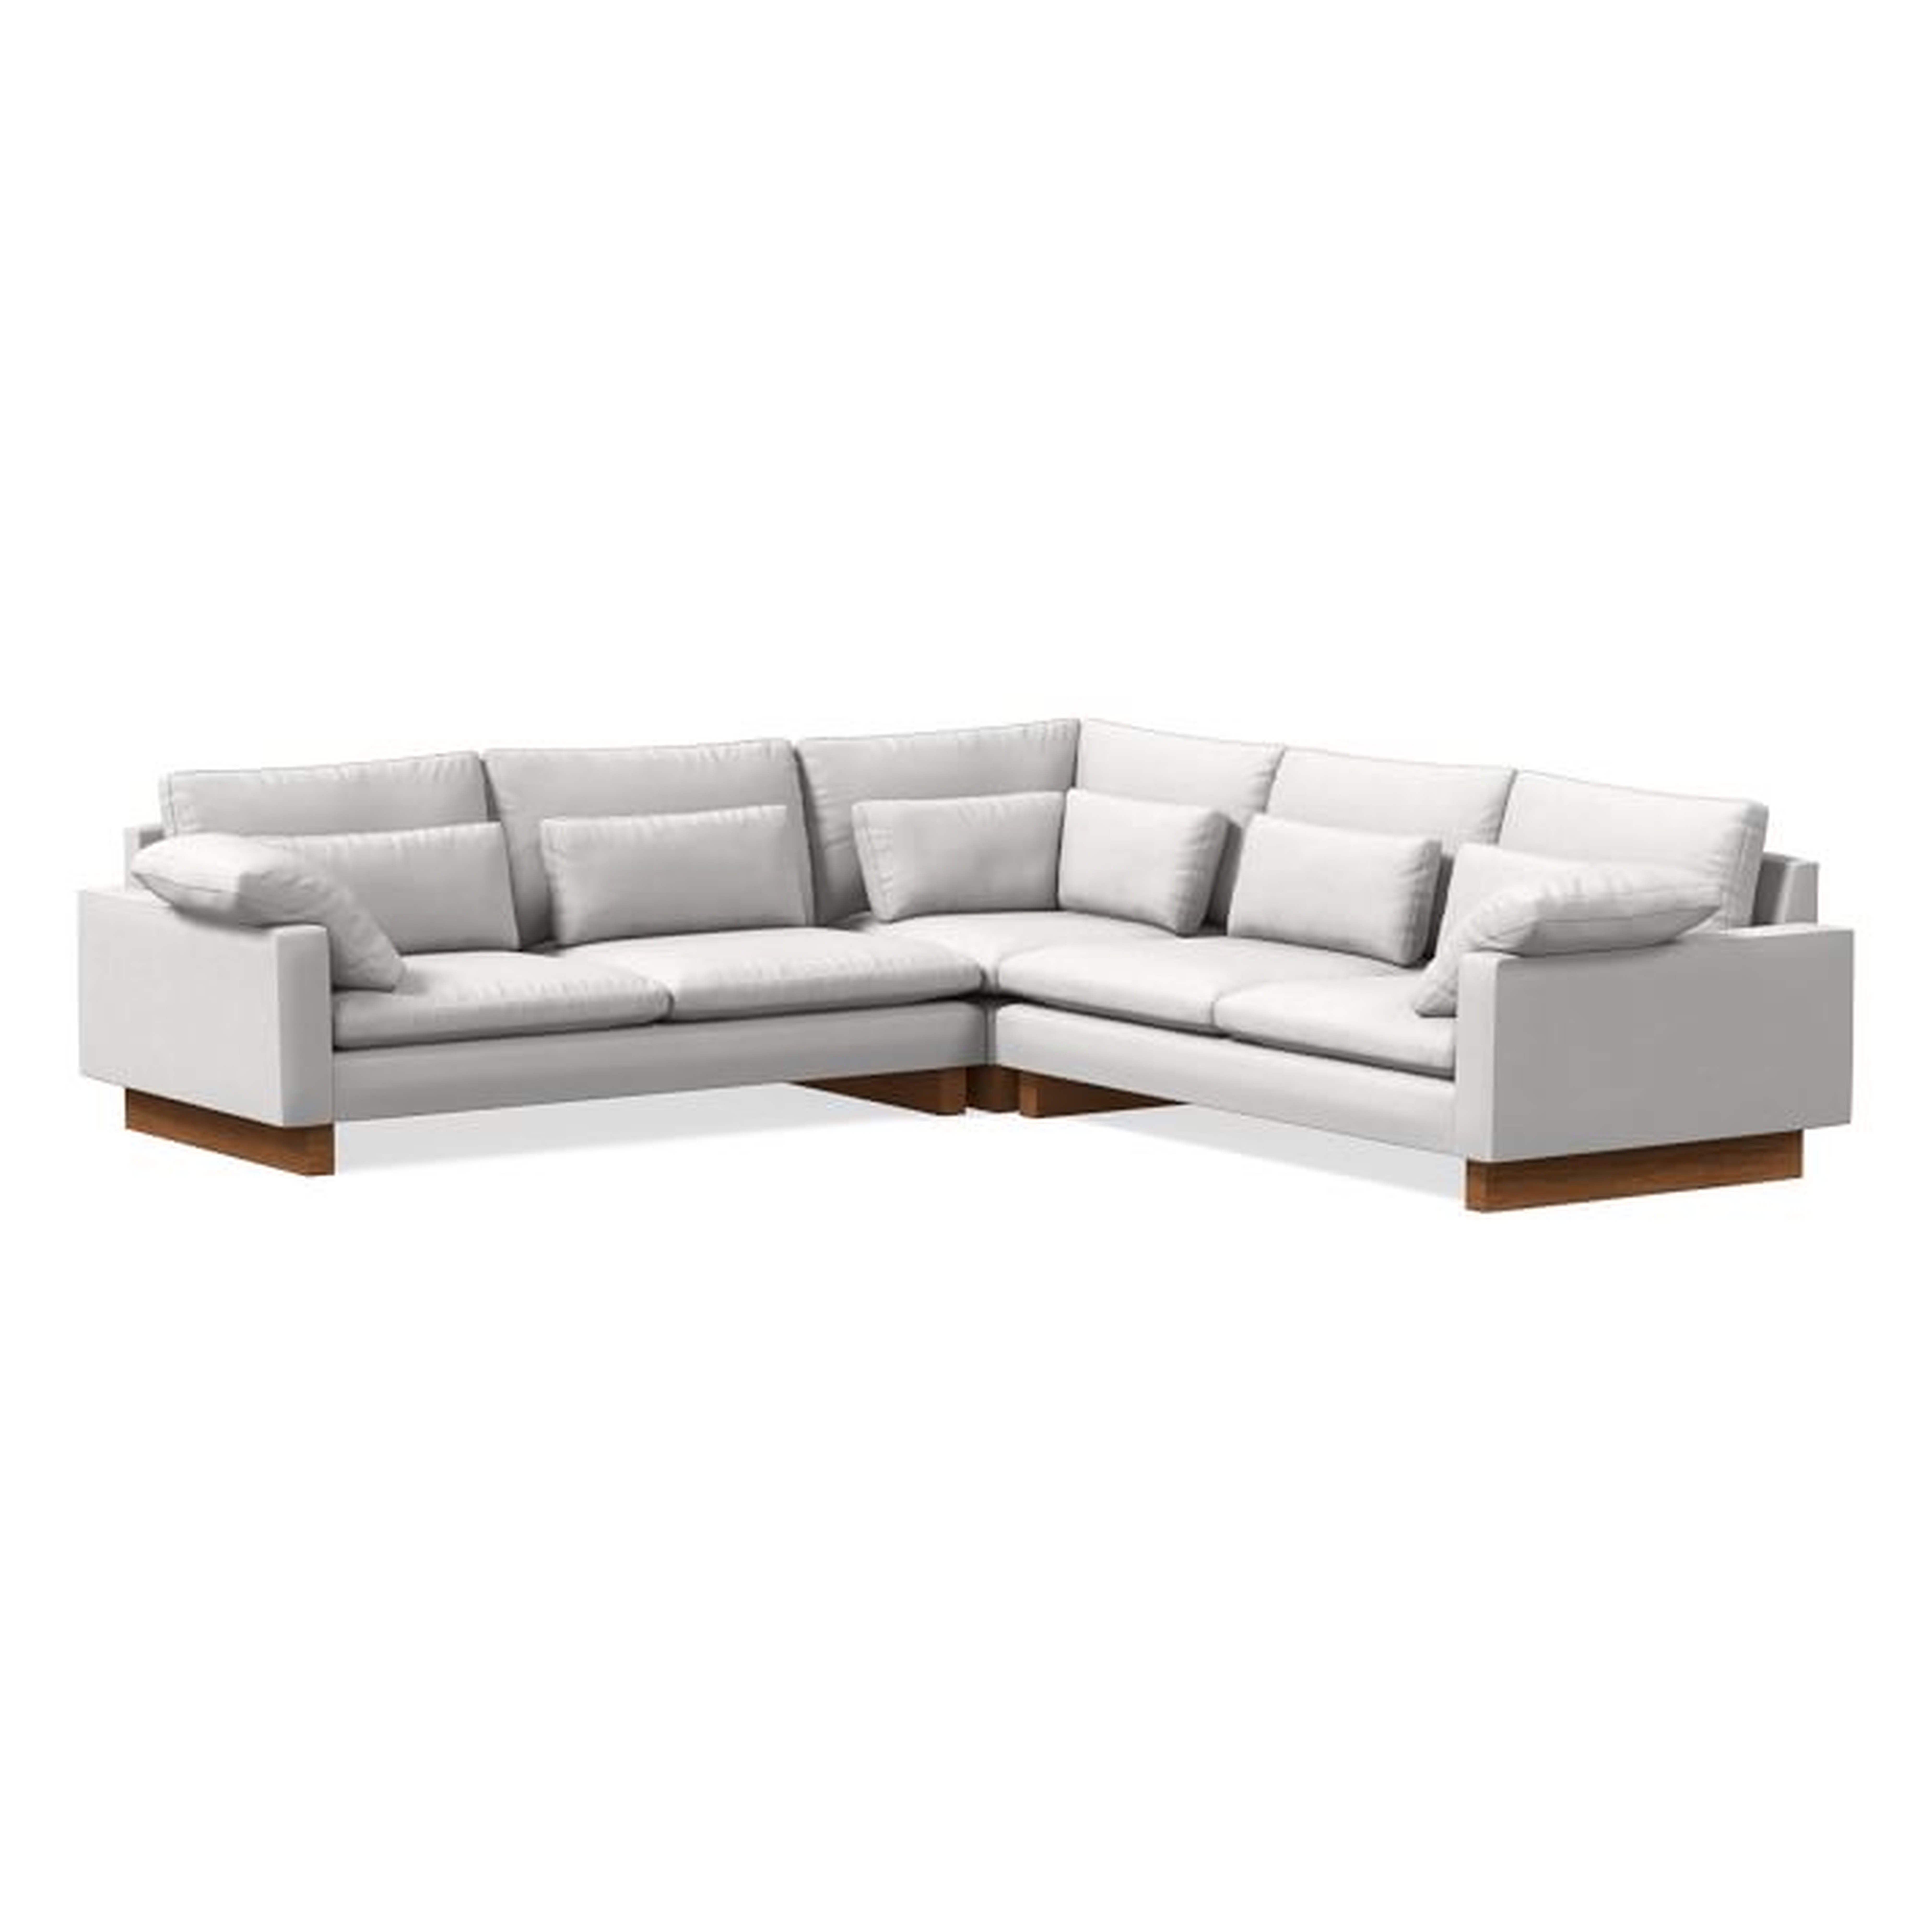 Harmony 3-Piece L-Shaped Sectional, Eco Weave Oyster, 41" Depth - West Elm